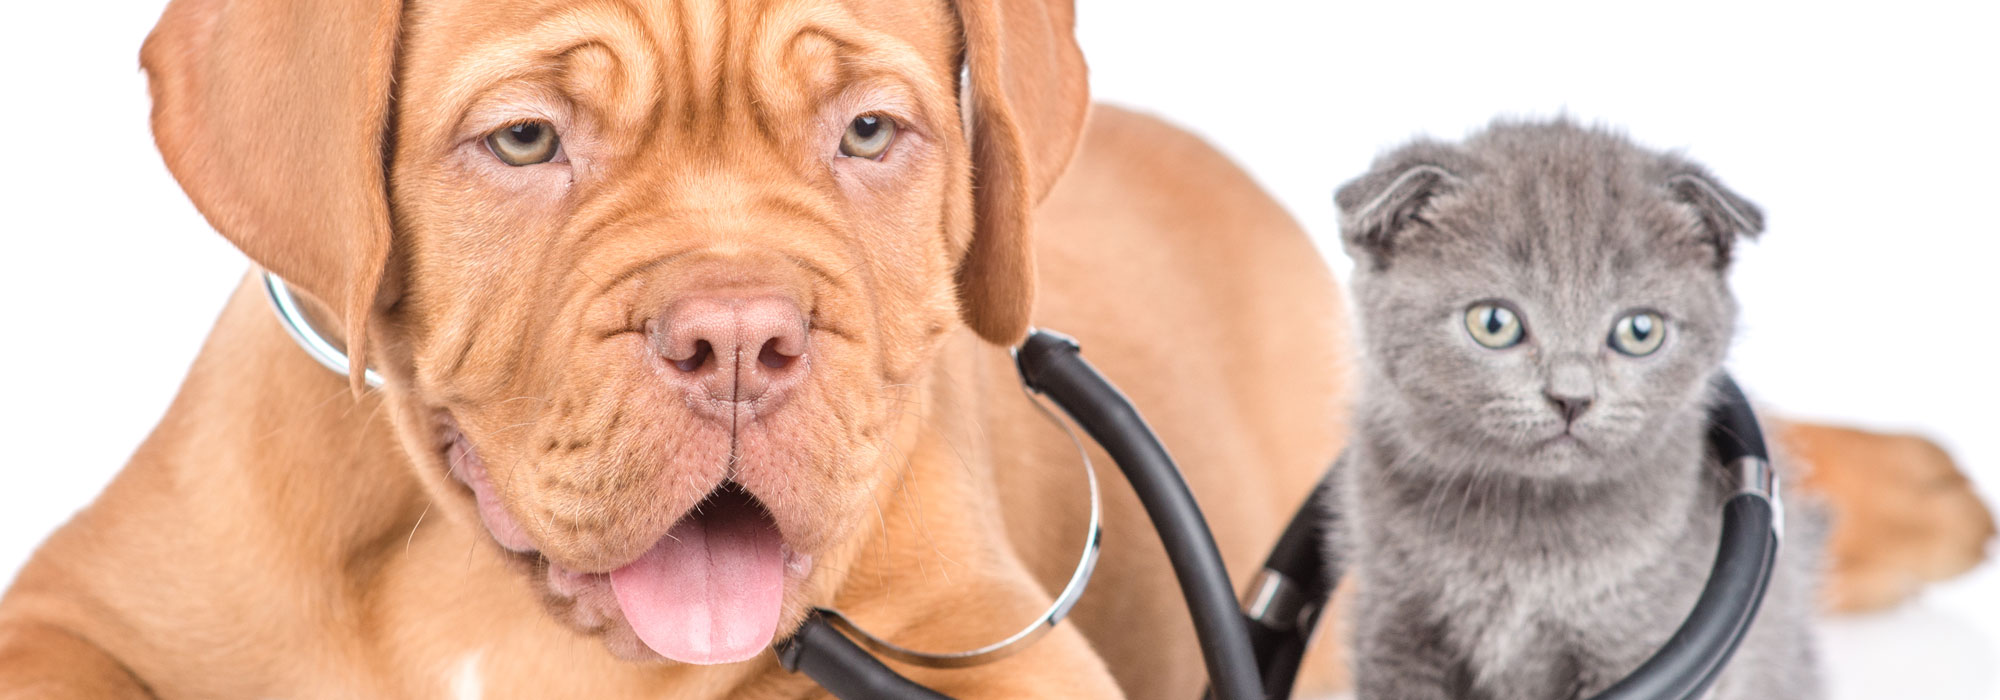 Pets with stethoscope